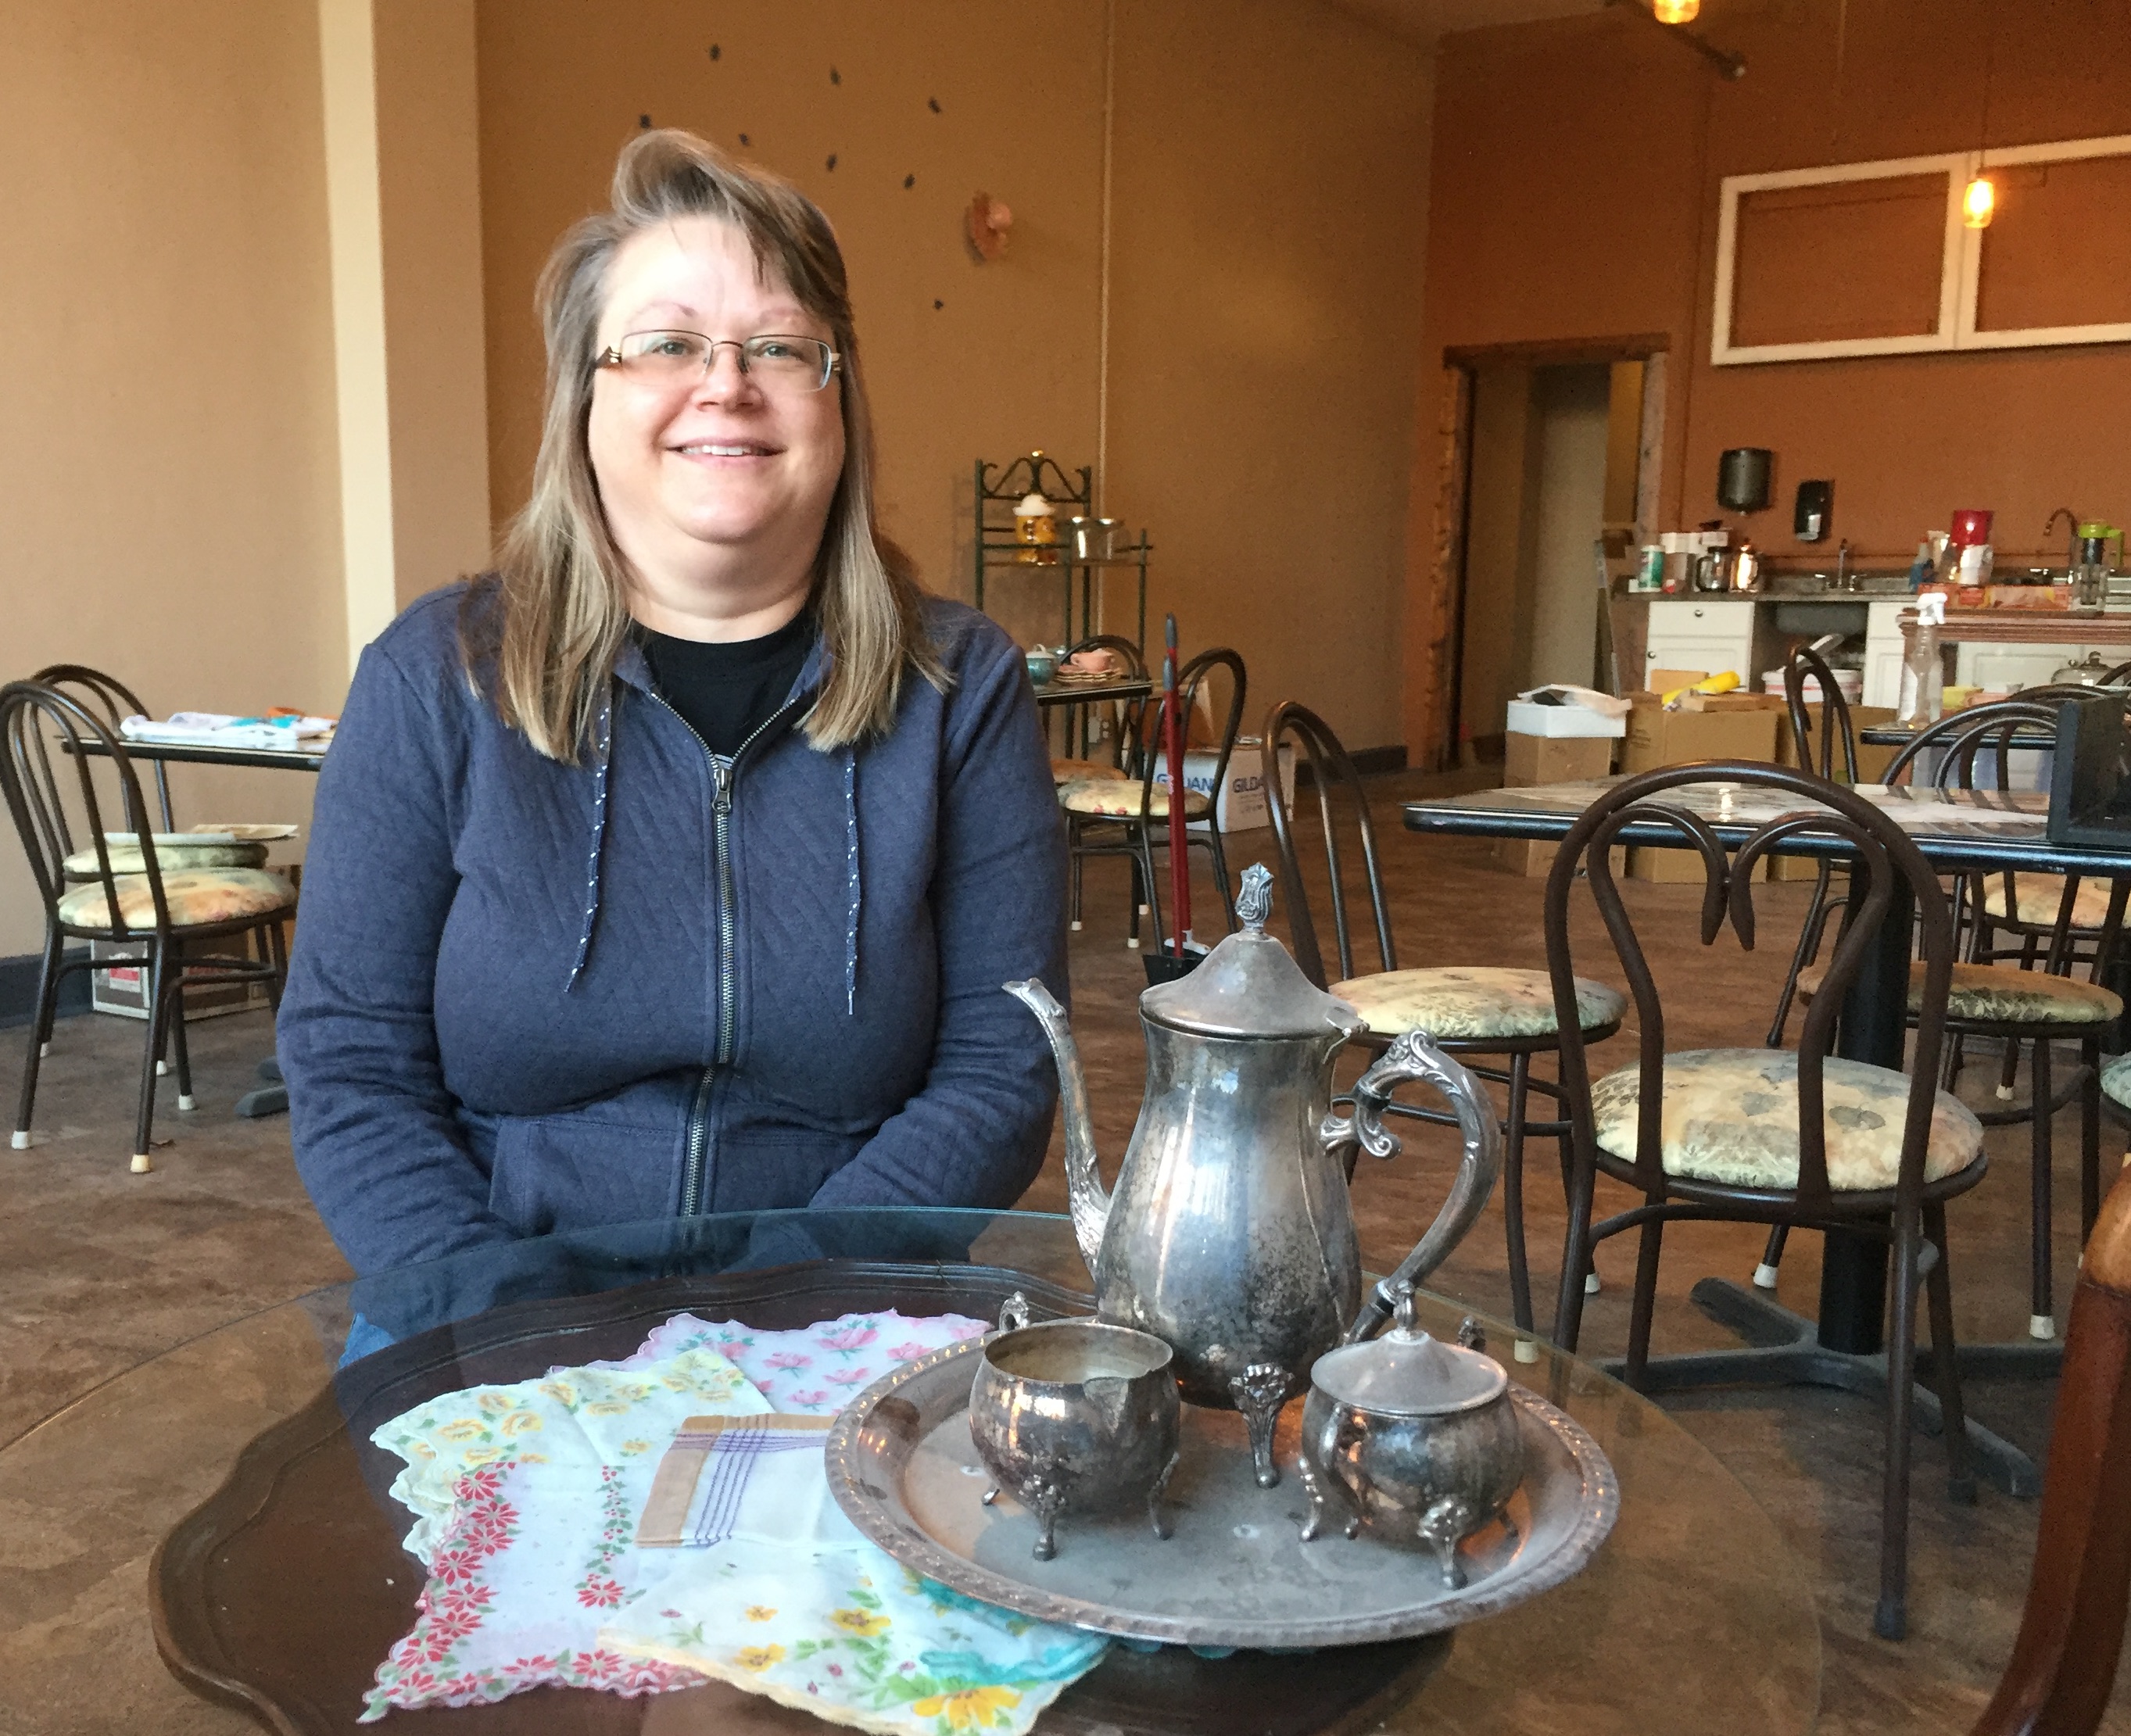 As the owner of CS3, Donna Kessler is opening a new organic deli and tea shop across the street.